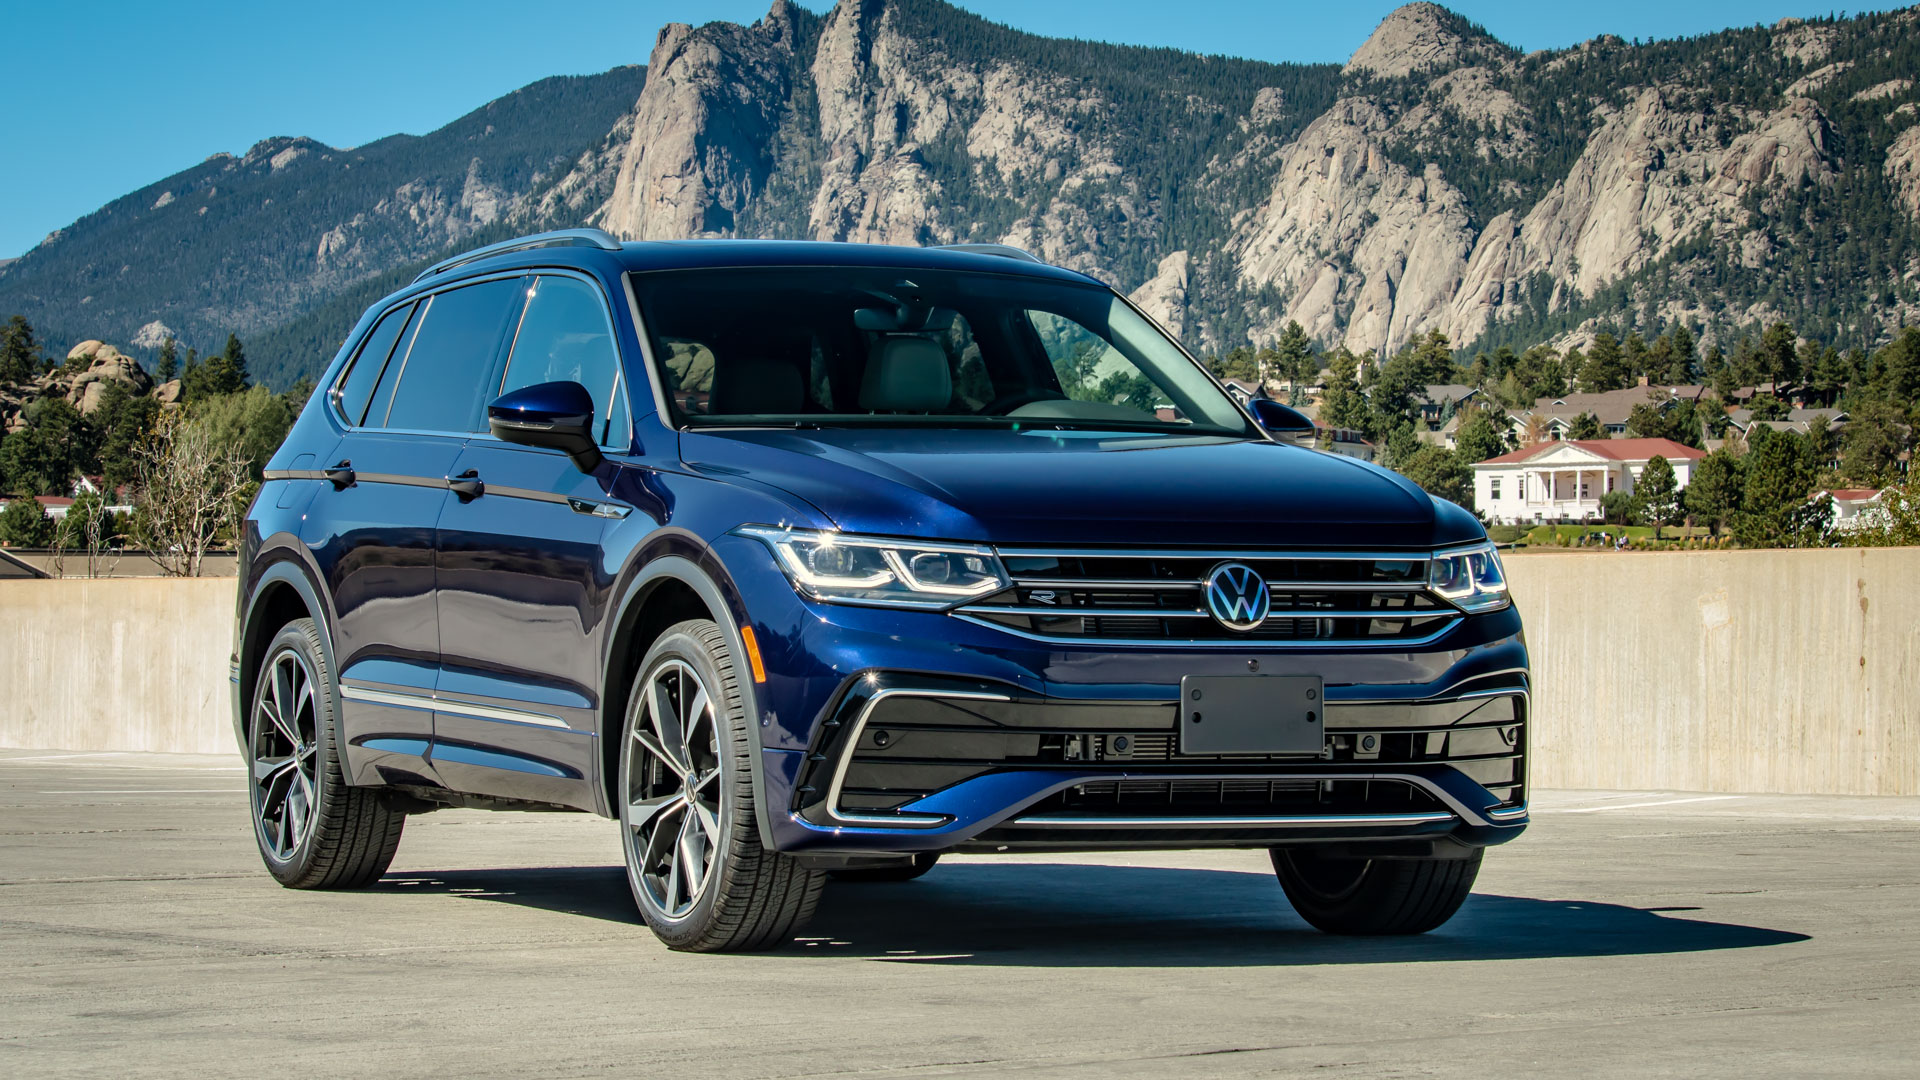 2022 Volkswagen Tiguan First Drive Review: Stick To Your Guns